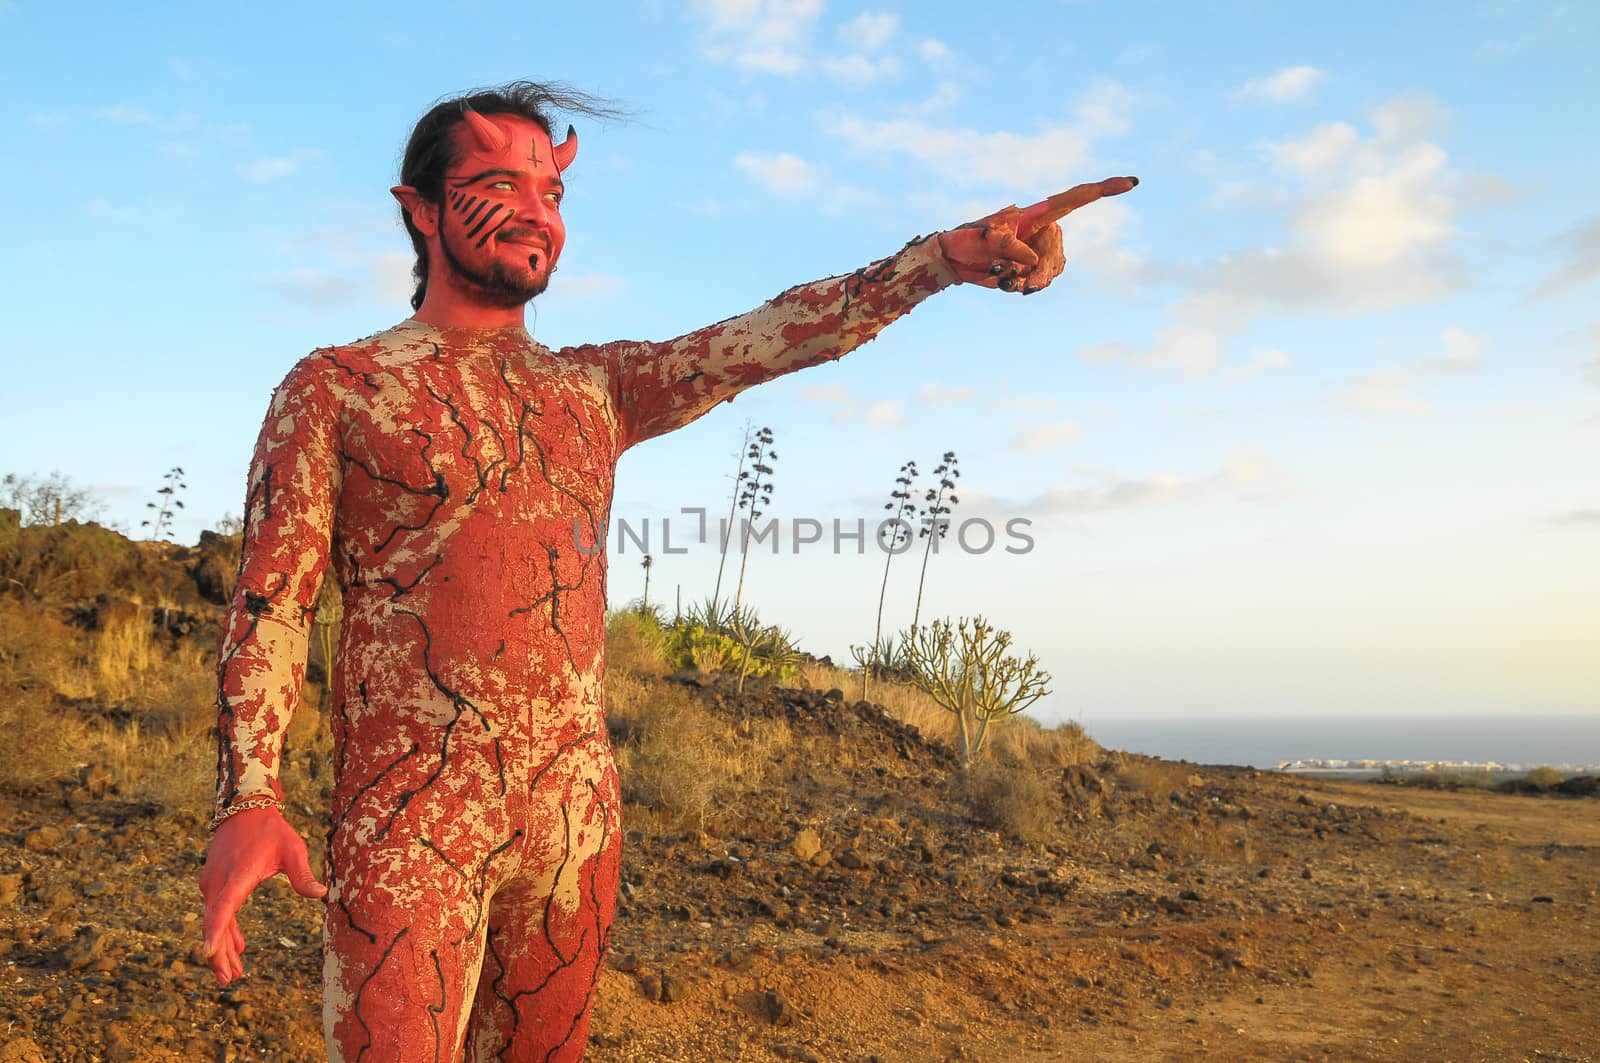 Latin American Man with Long Hairs Masked as a Devil in the Desert